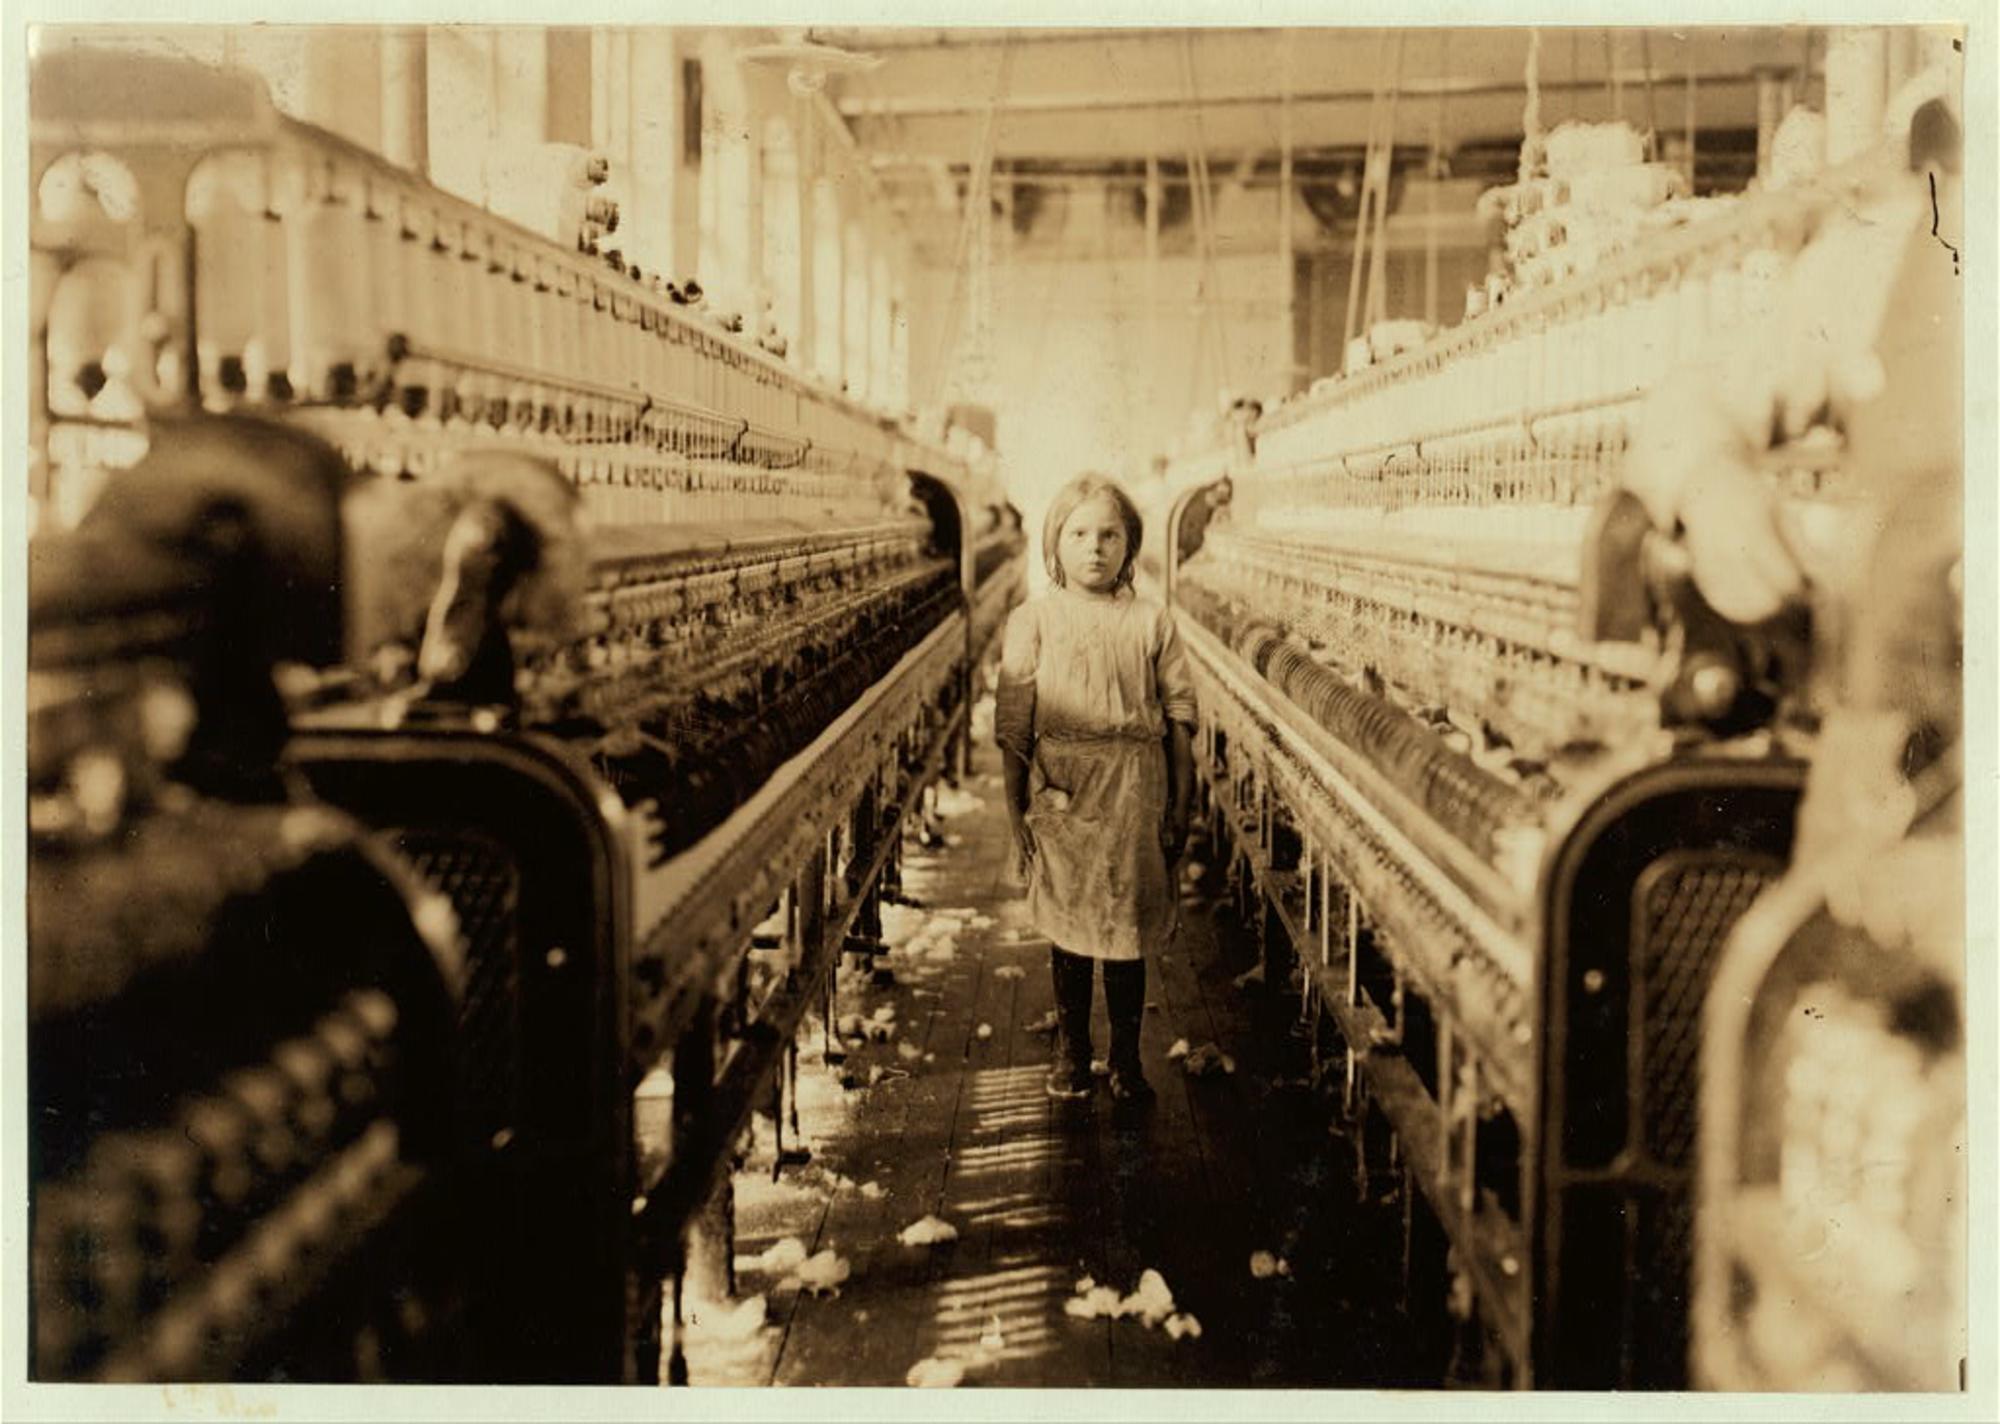 Child laborer in a South Carolina textile mill, 1908. Photograph by Lewis Hine. Image courtesy Library of Congress.